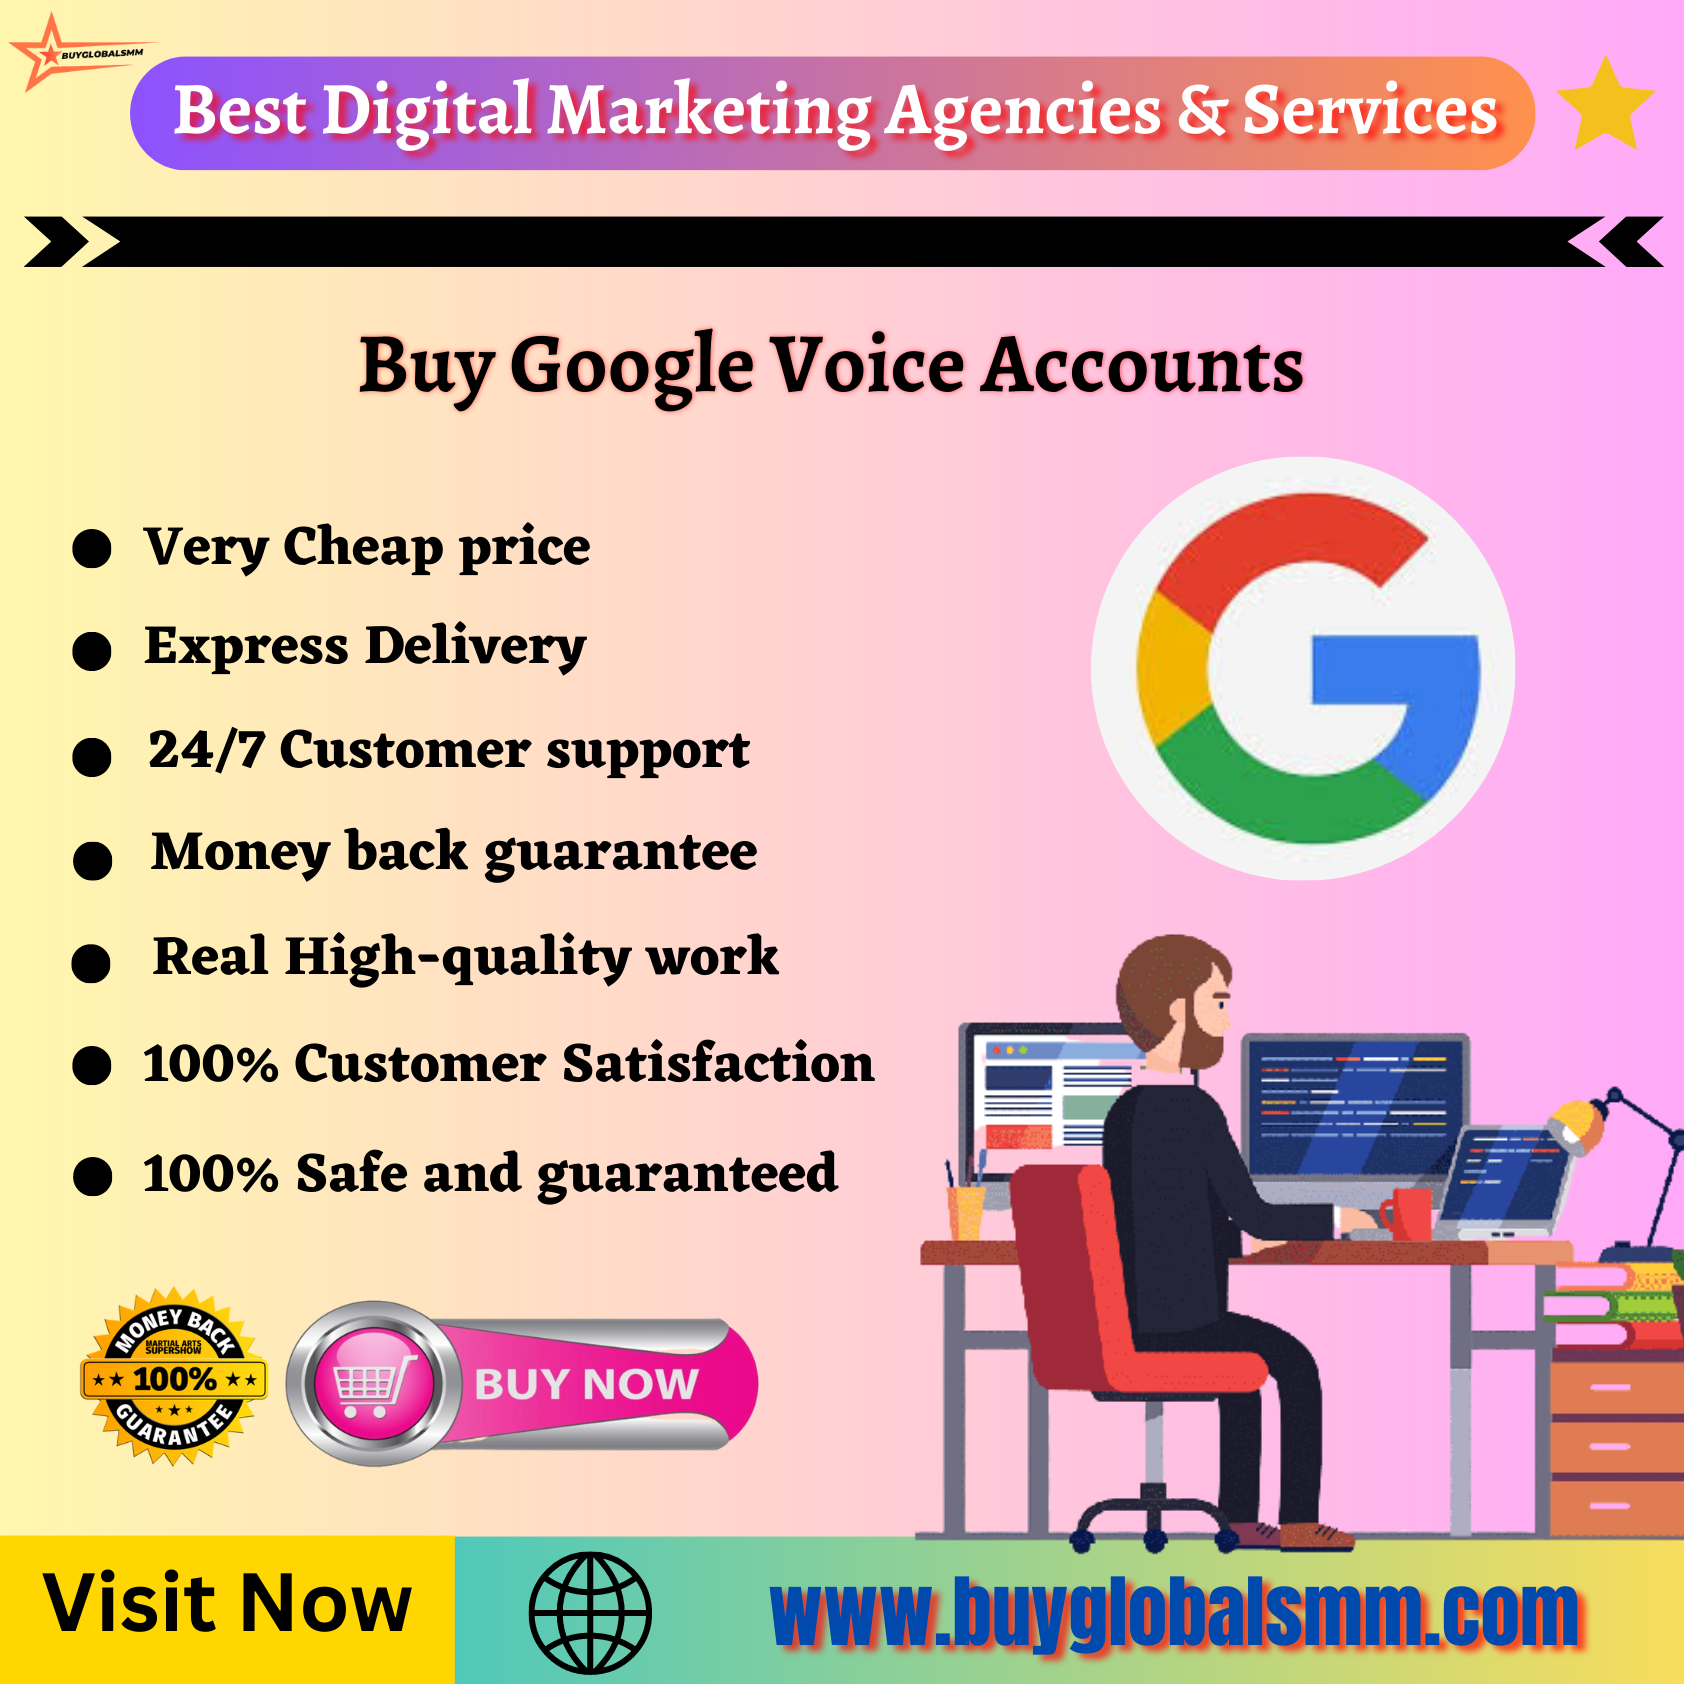 Buy Google Voice Accounts-100% trusted service, & cheap...